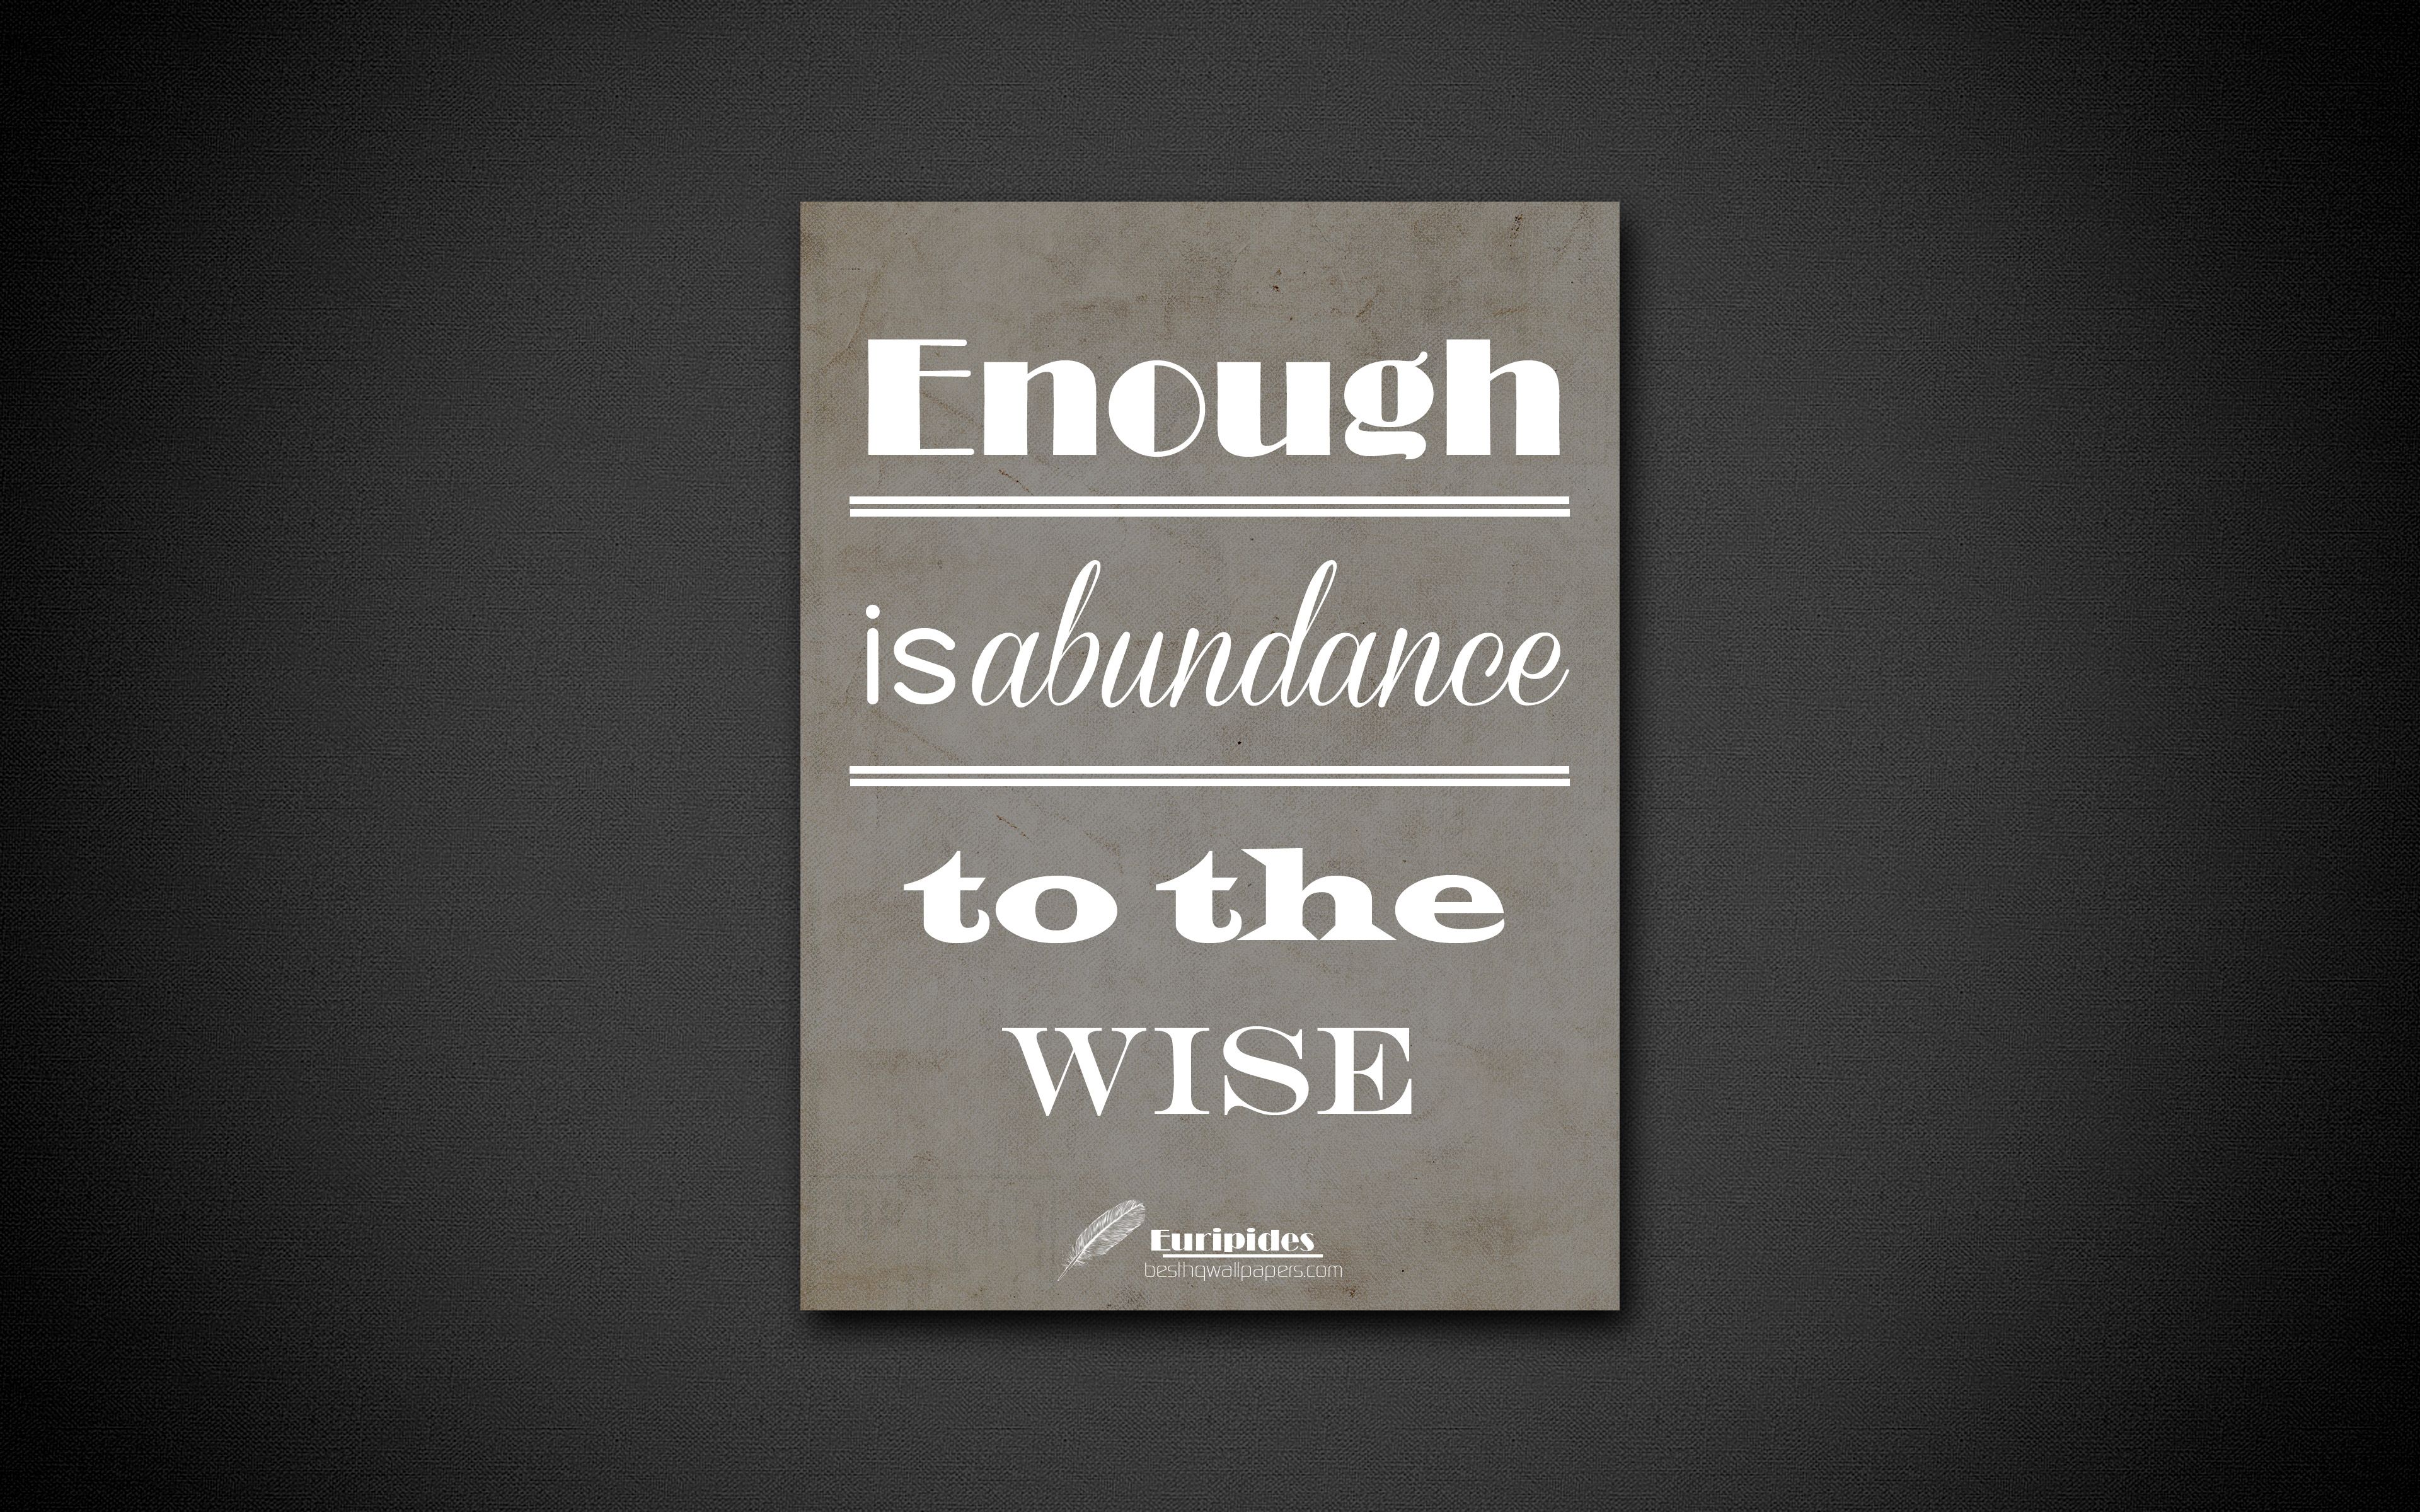 Download wallpaper 4k, Enough is abundance to the wise, quotes